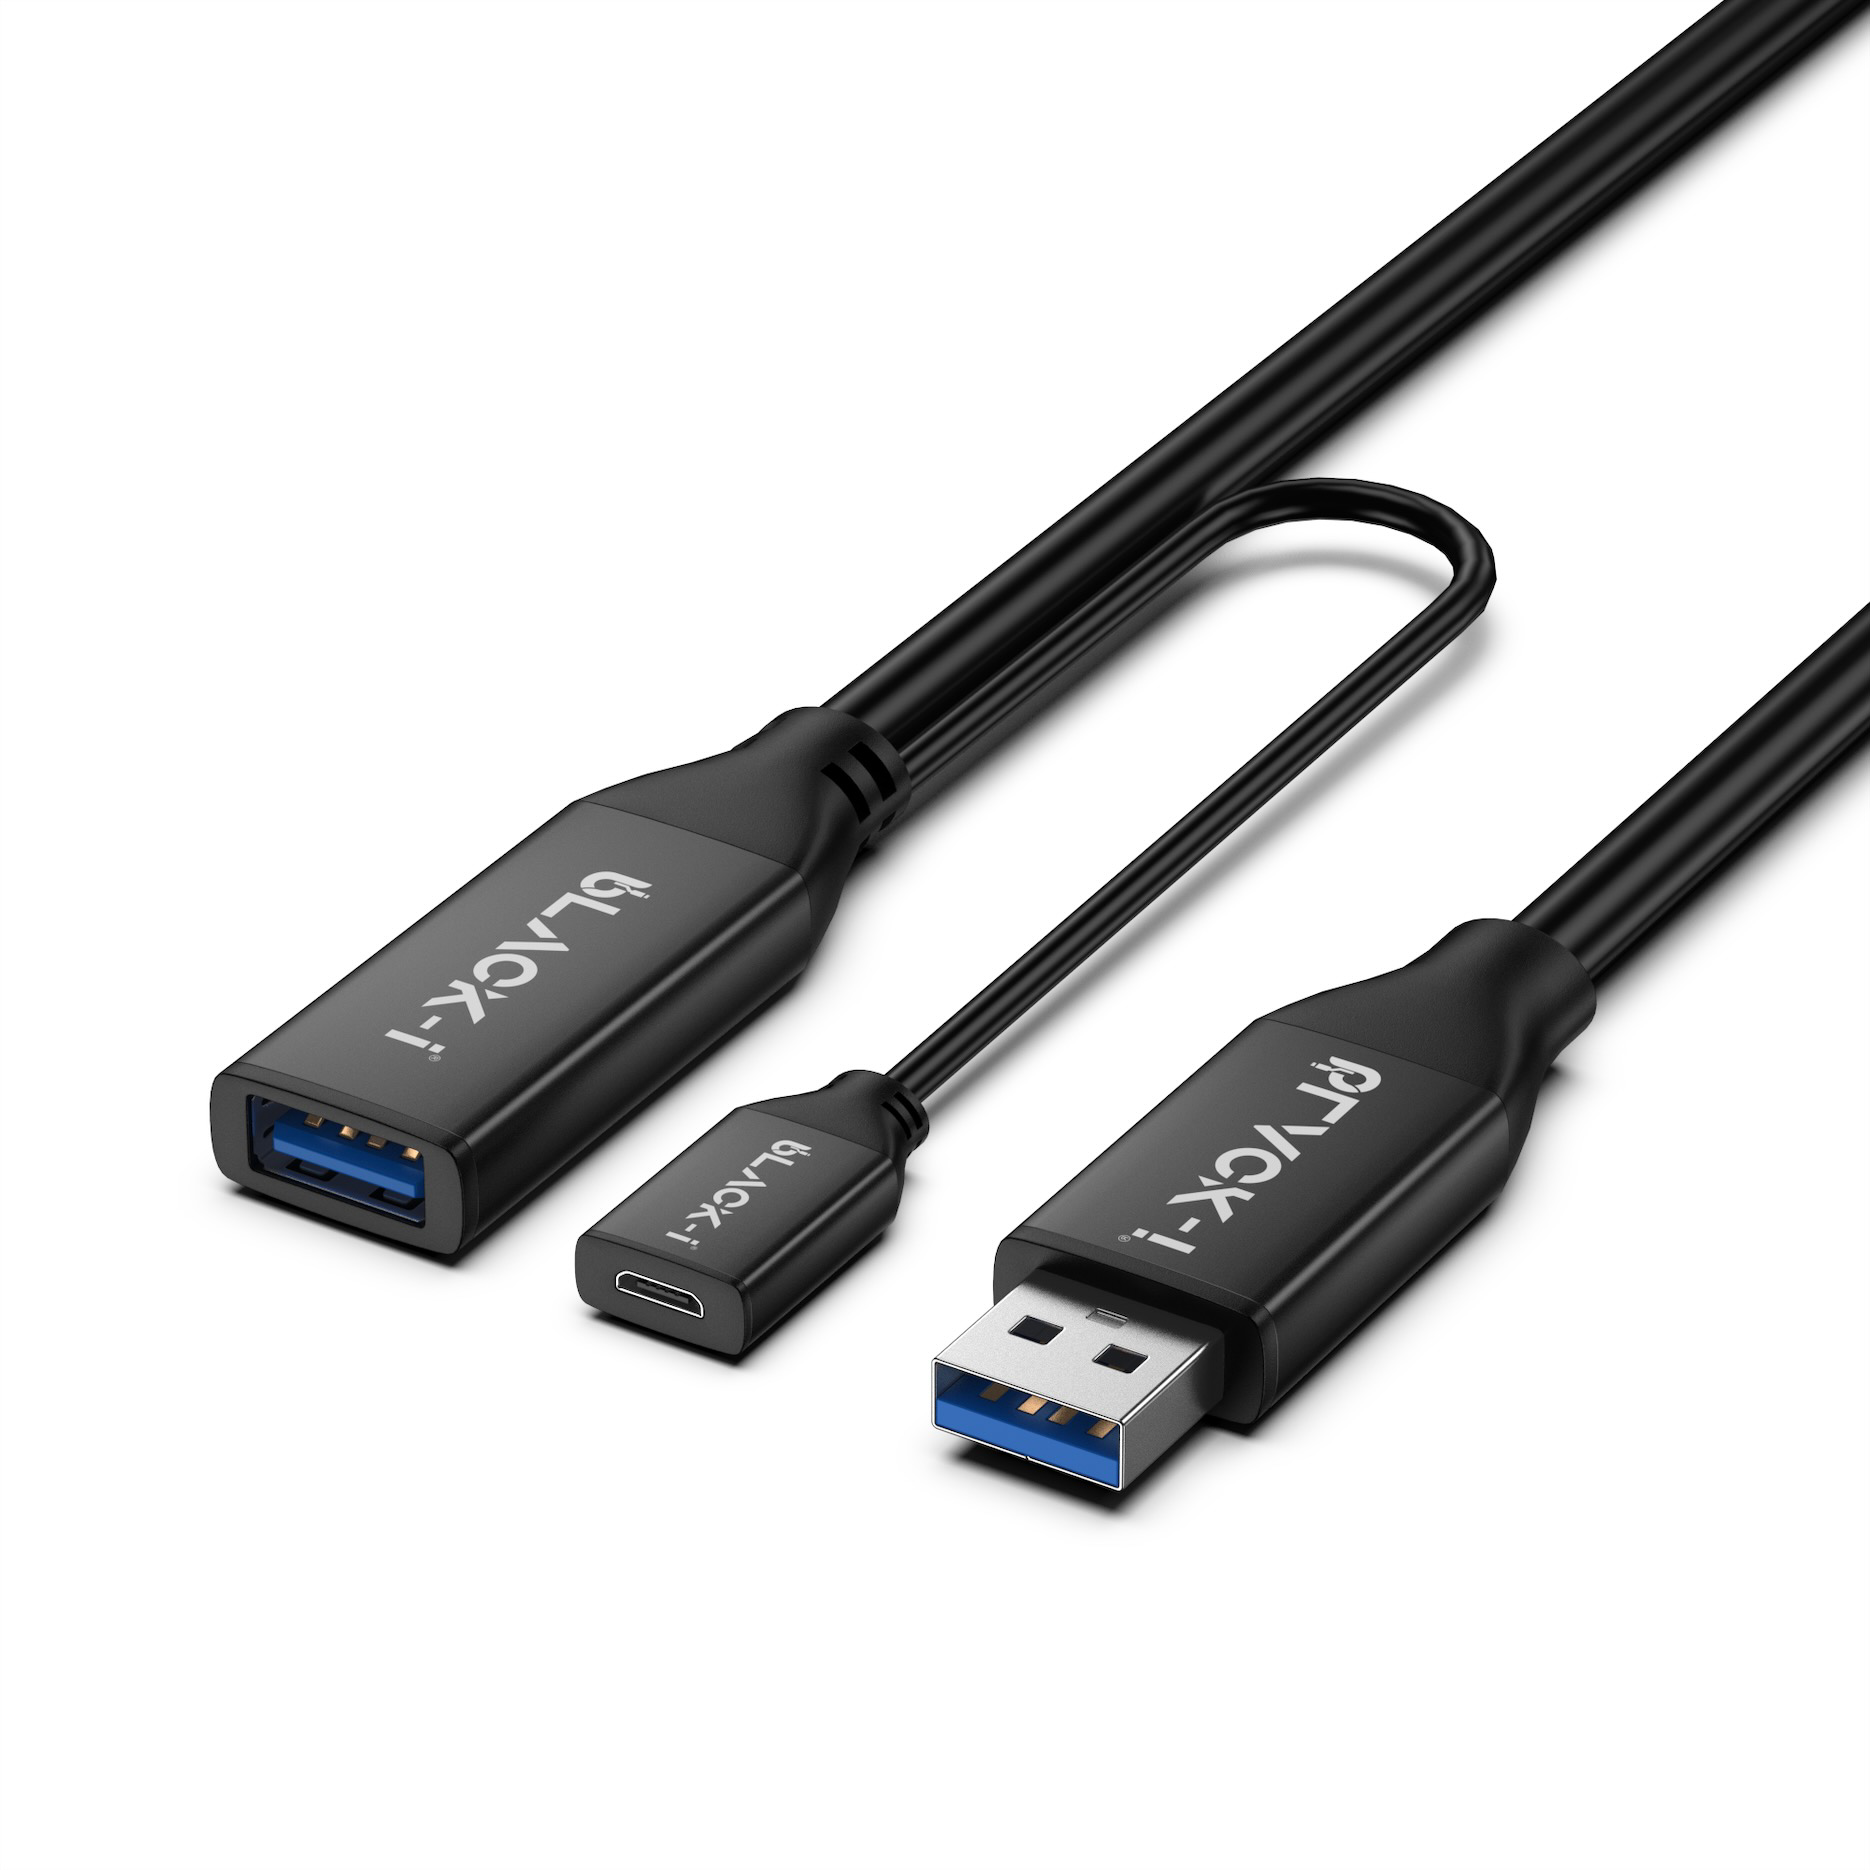 Black-i USB 3.0 Extension Cable – Extend and Enhance Your Connectivity for Seamless Data Transfer